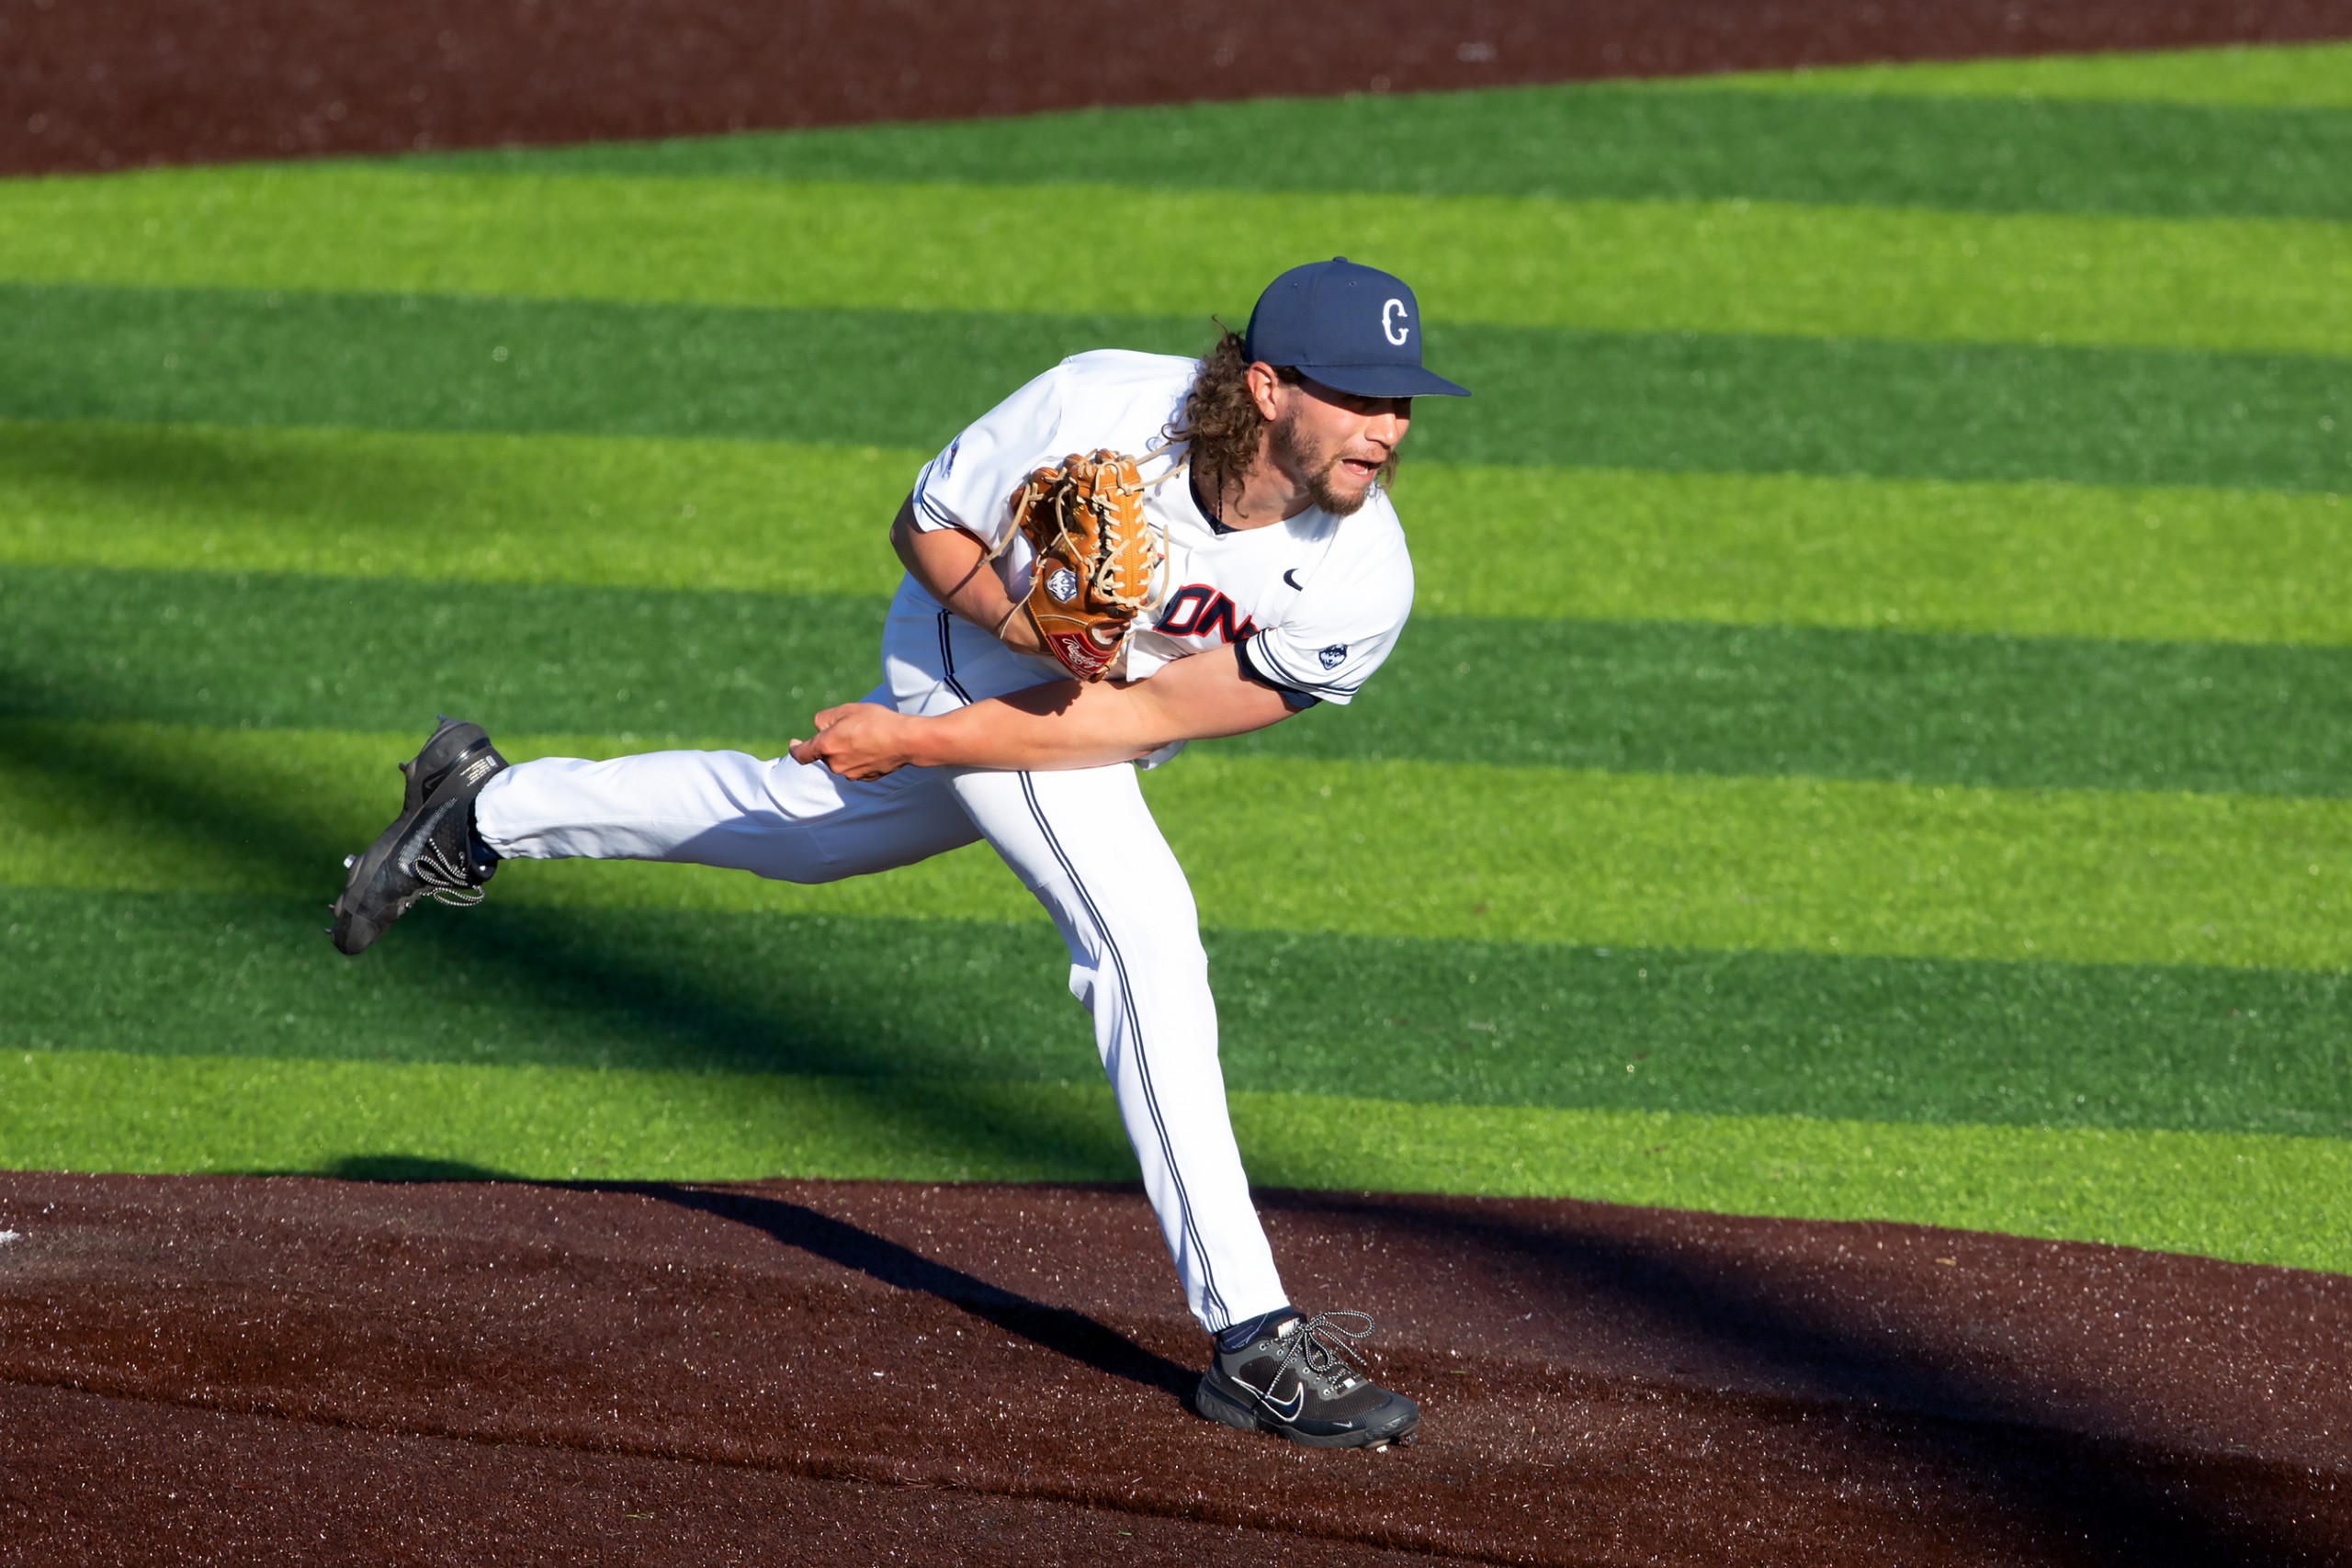 UConn closer Caleb Wurster selected in the 15th round of MLB Draft by Miami  Marlins - The UConn Blog